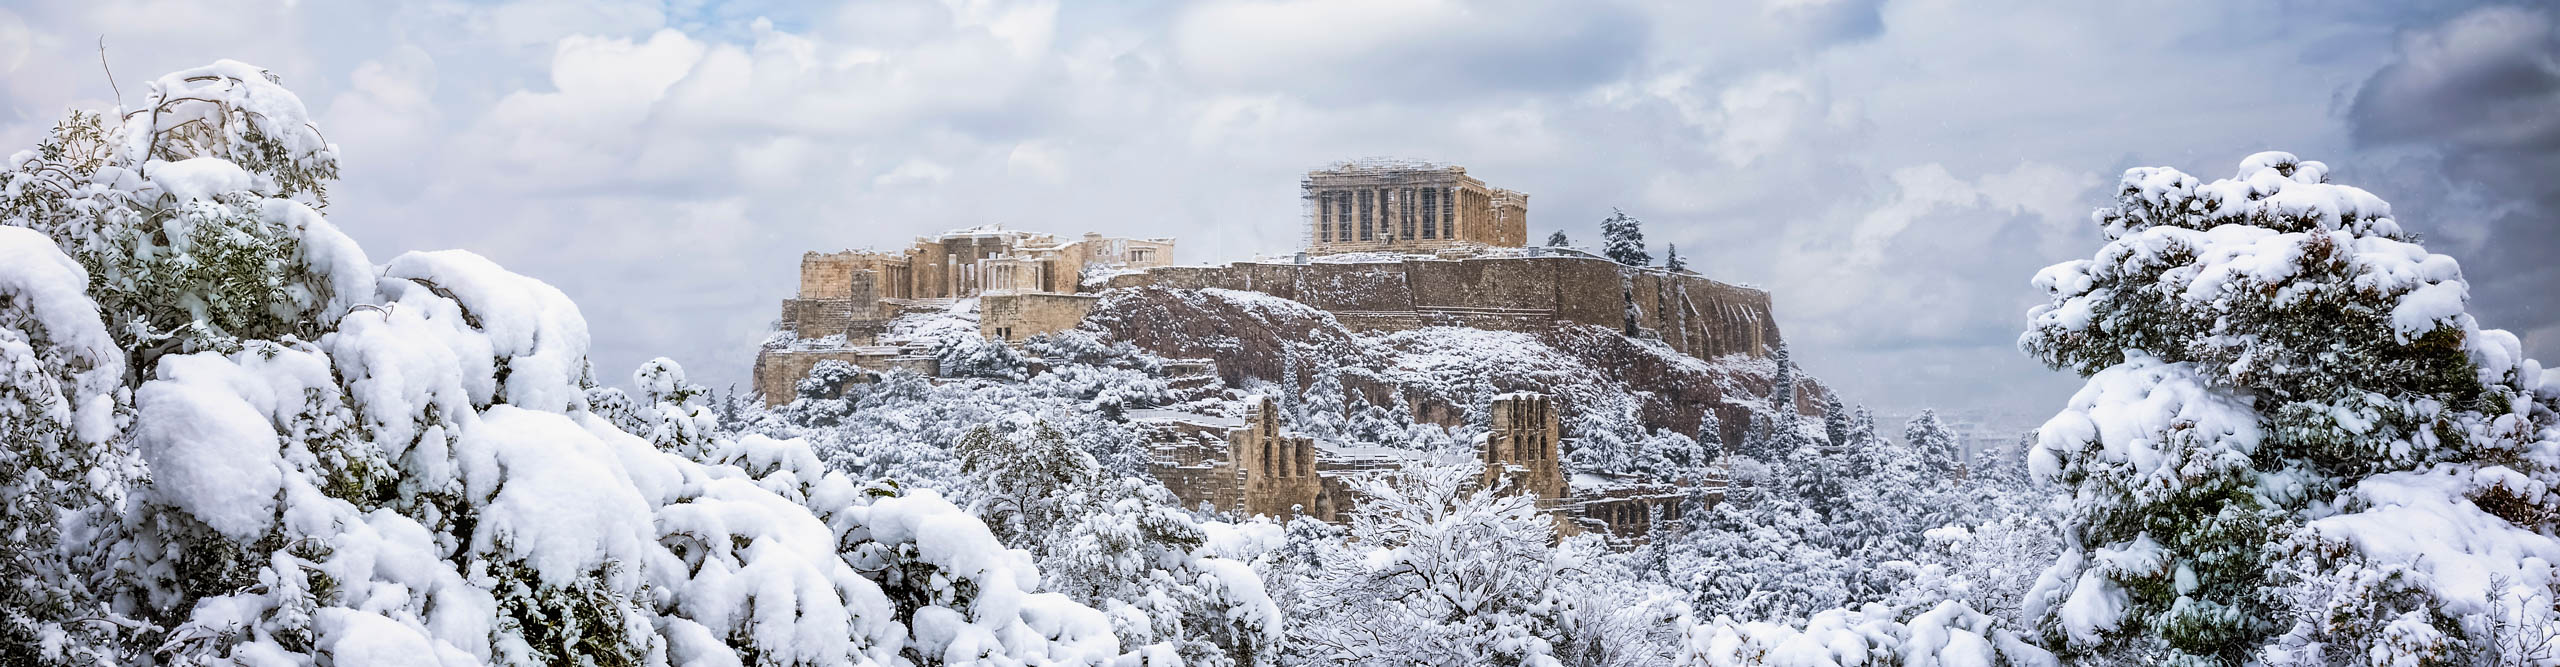 Snow on Parthenon Temple and trees in Athens, Greece